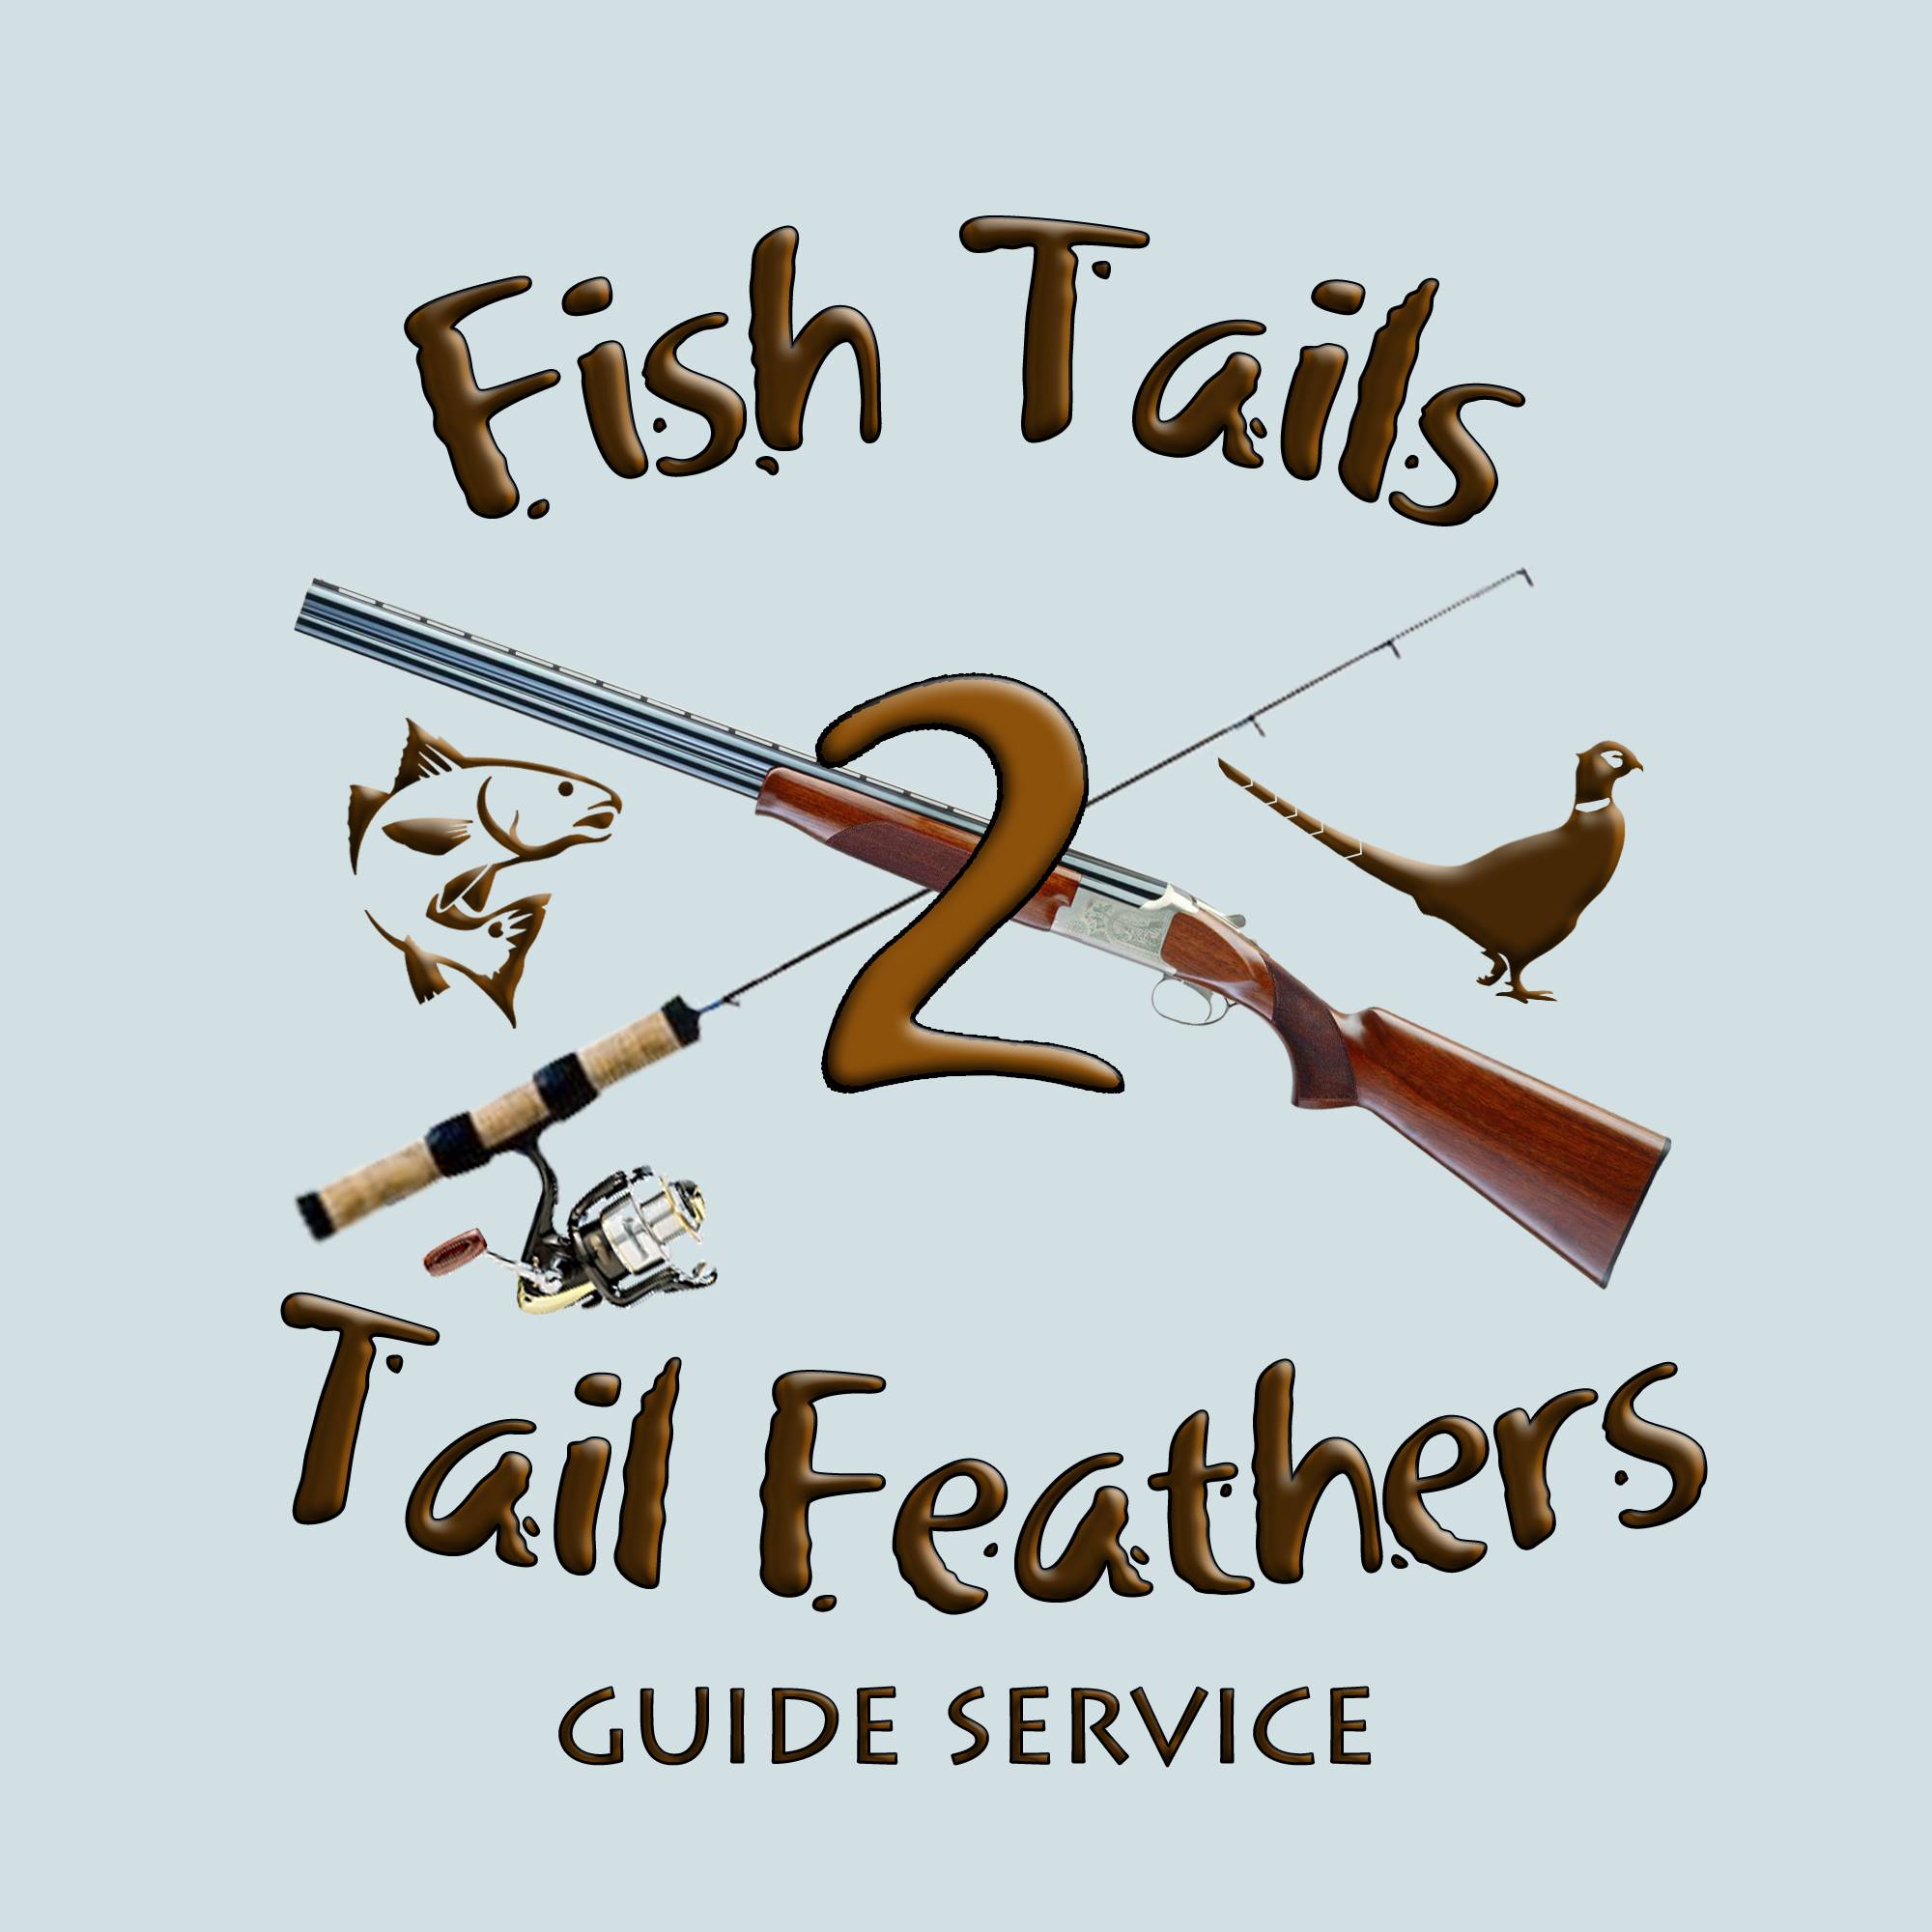 Fish Tails 2 Tail Feathers, Guided Fishing & Hunting Trips in Panama City Beach, Destin & Surrounding Areas